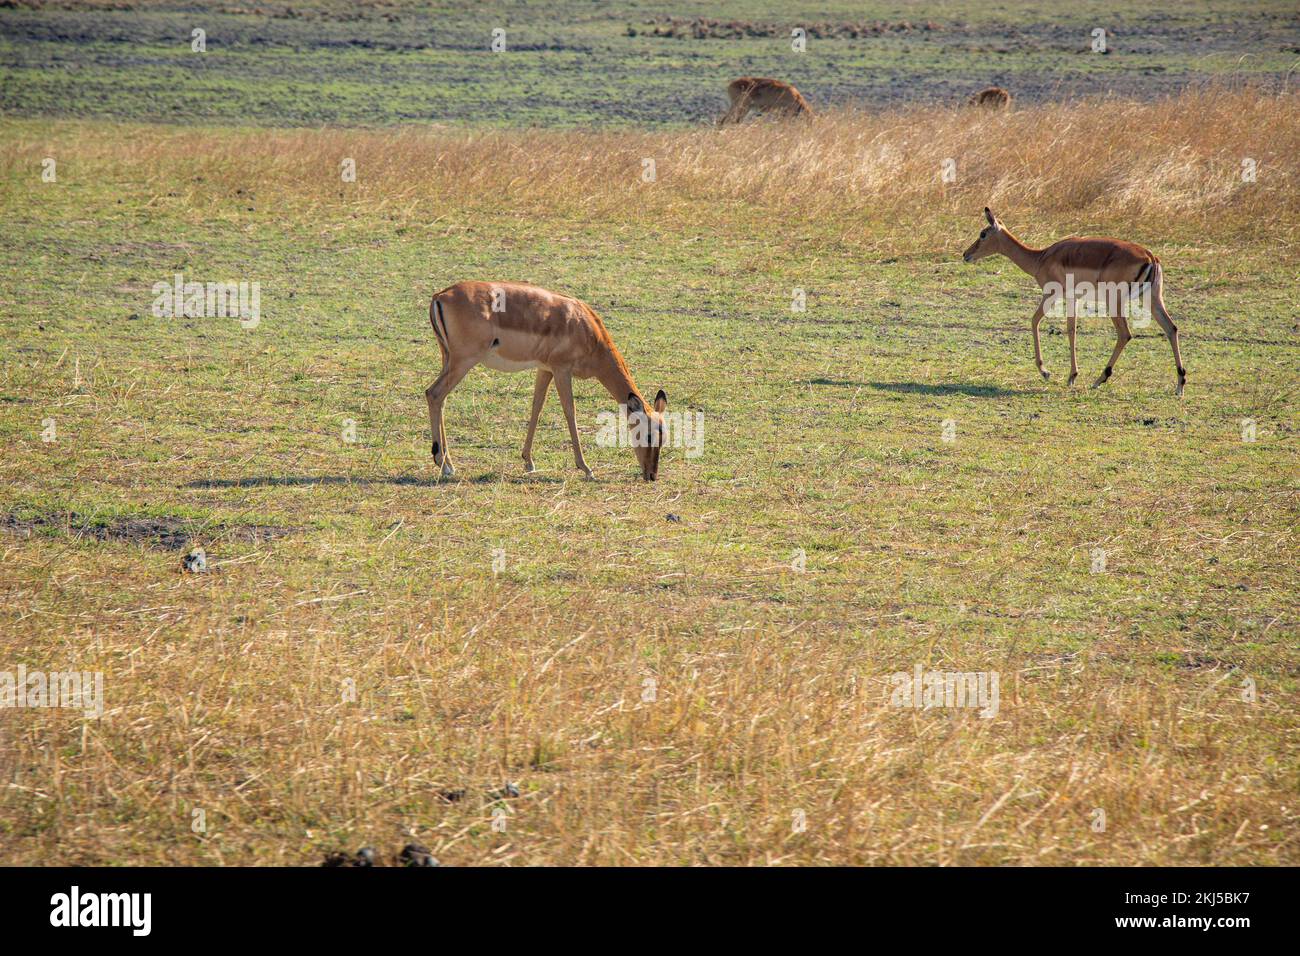 African Deer Wildlife of Zambia Africa in Chaminuka National Park Stock Photo